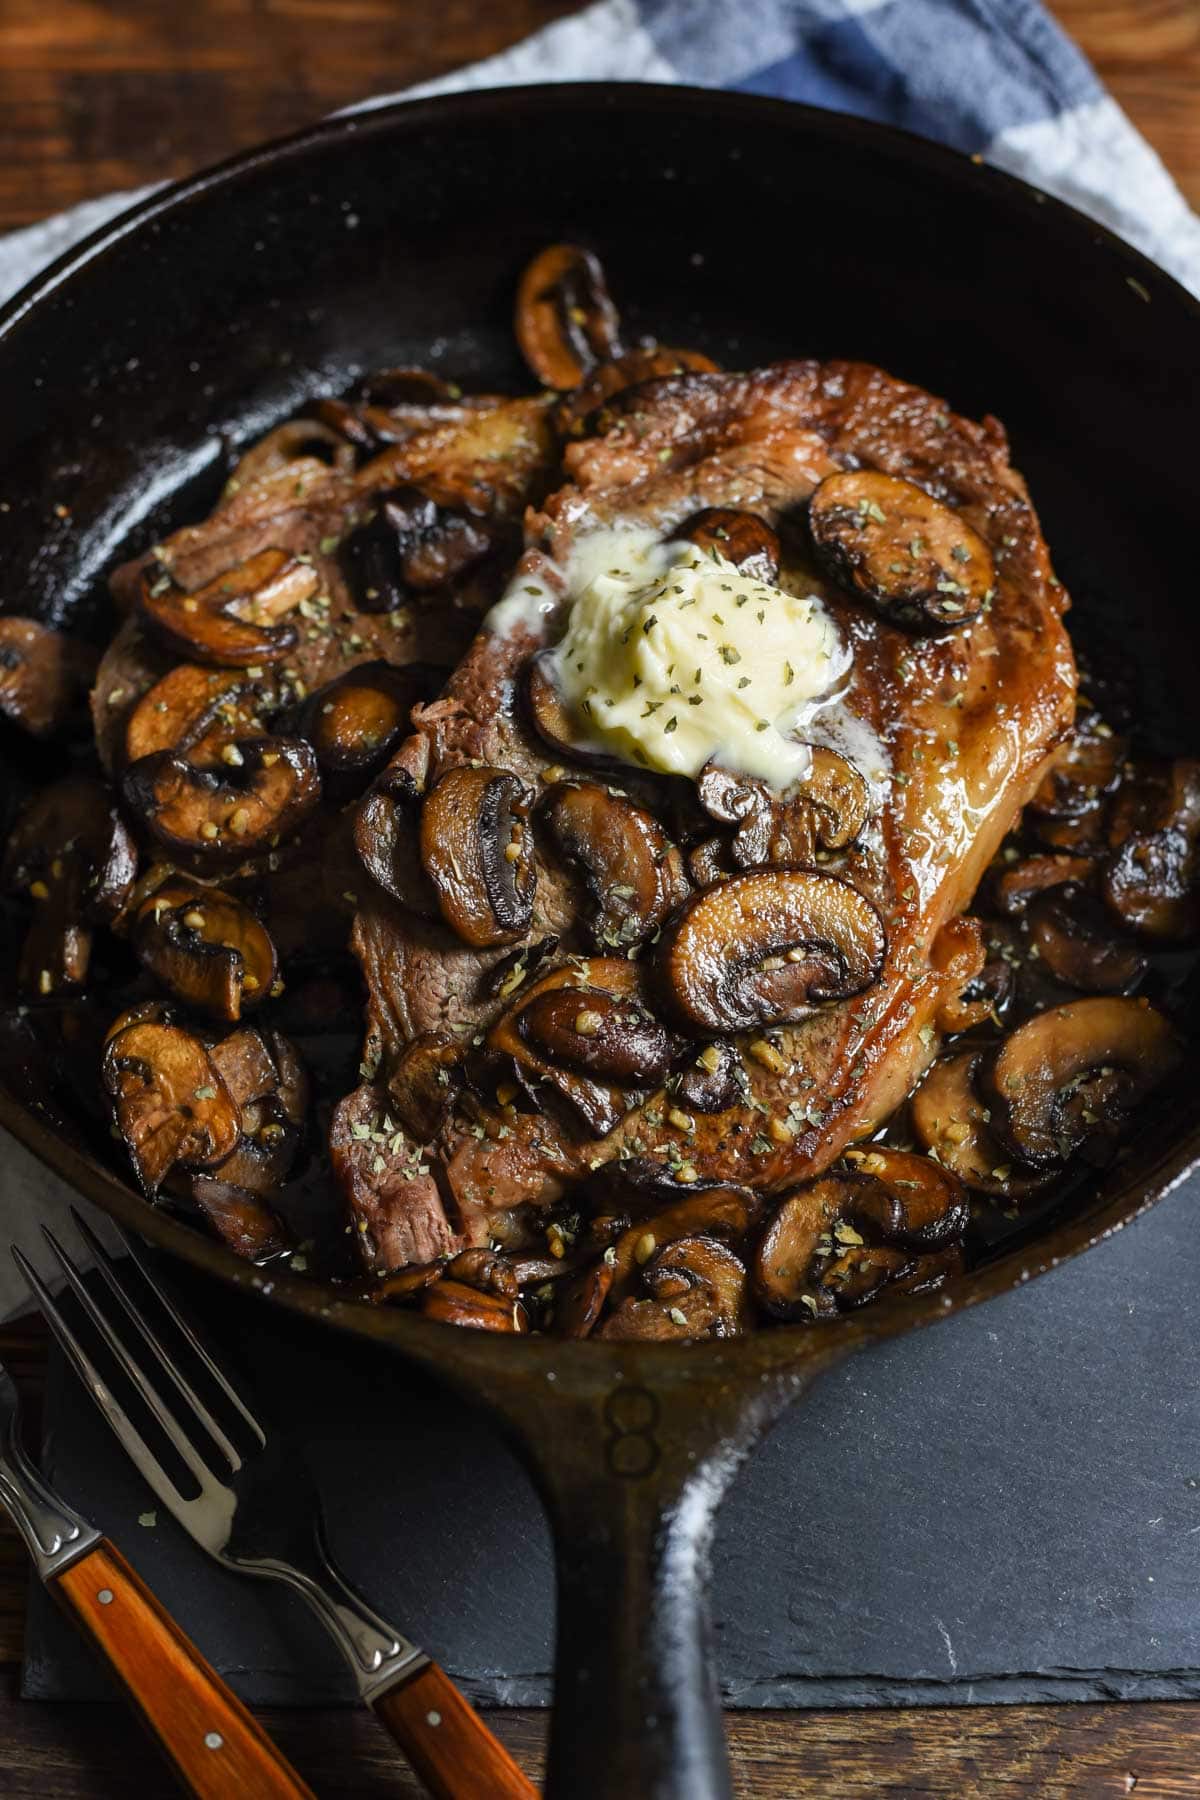 If you're looking for a special occasion meal that's super easy to make, try this Cast Iron Ribeye smothered with garlic butter mushrooms.